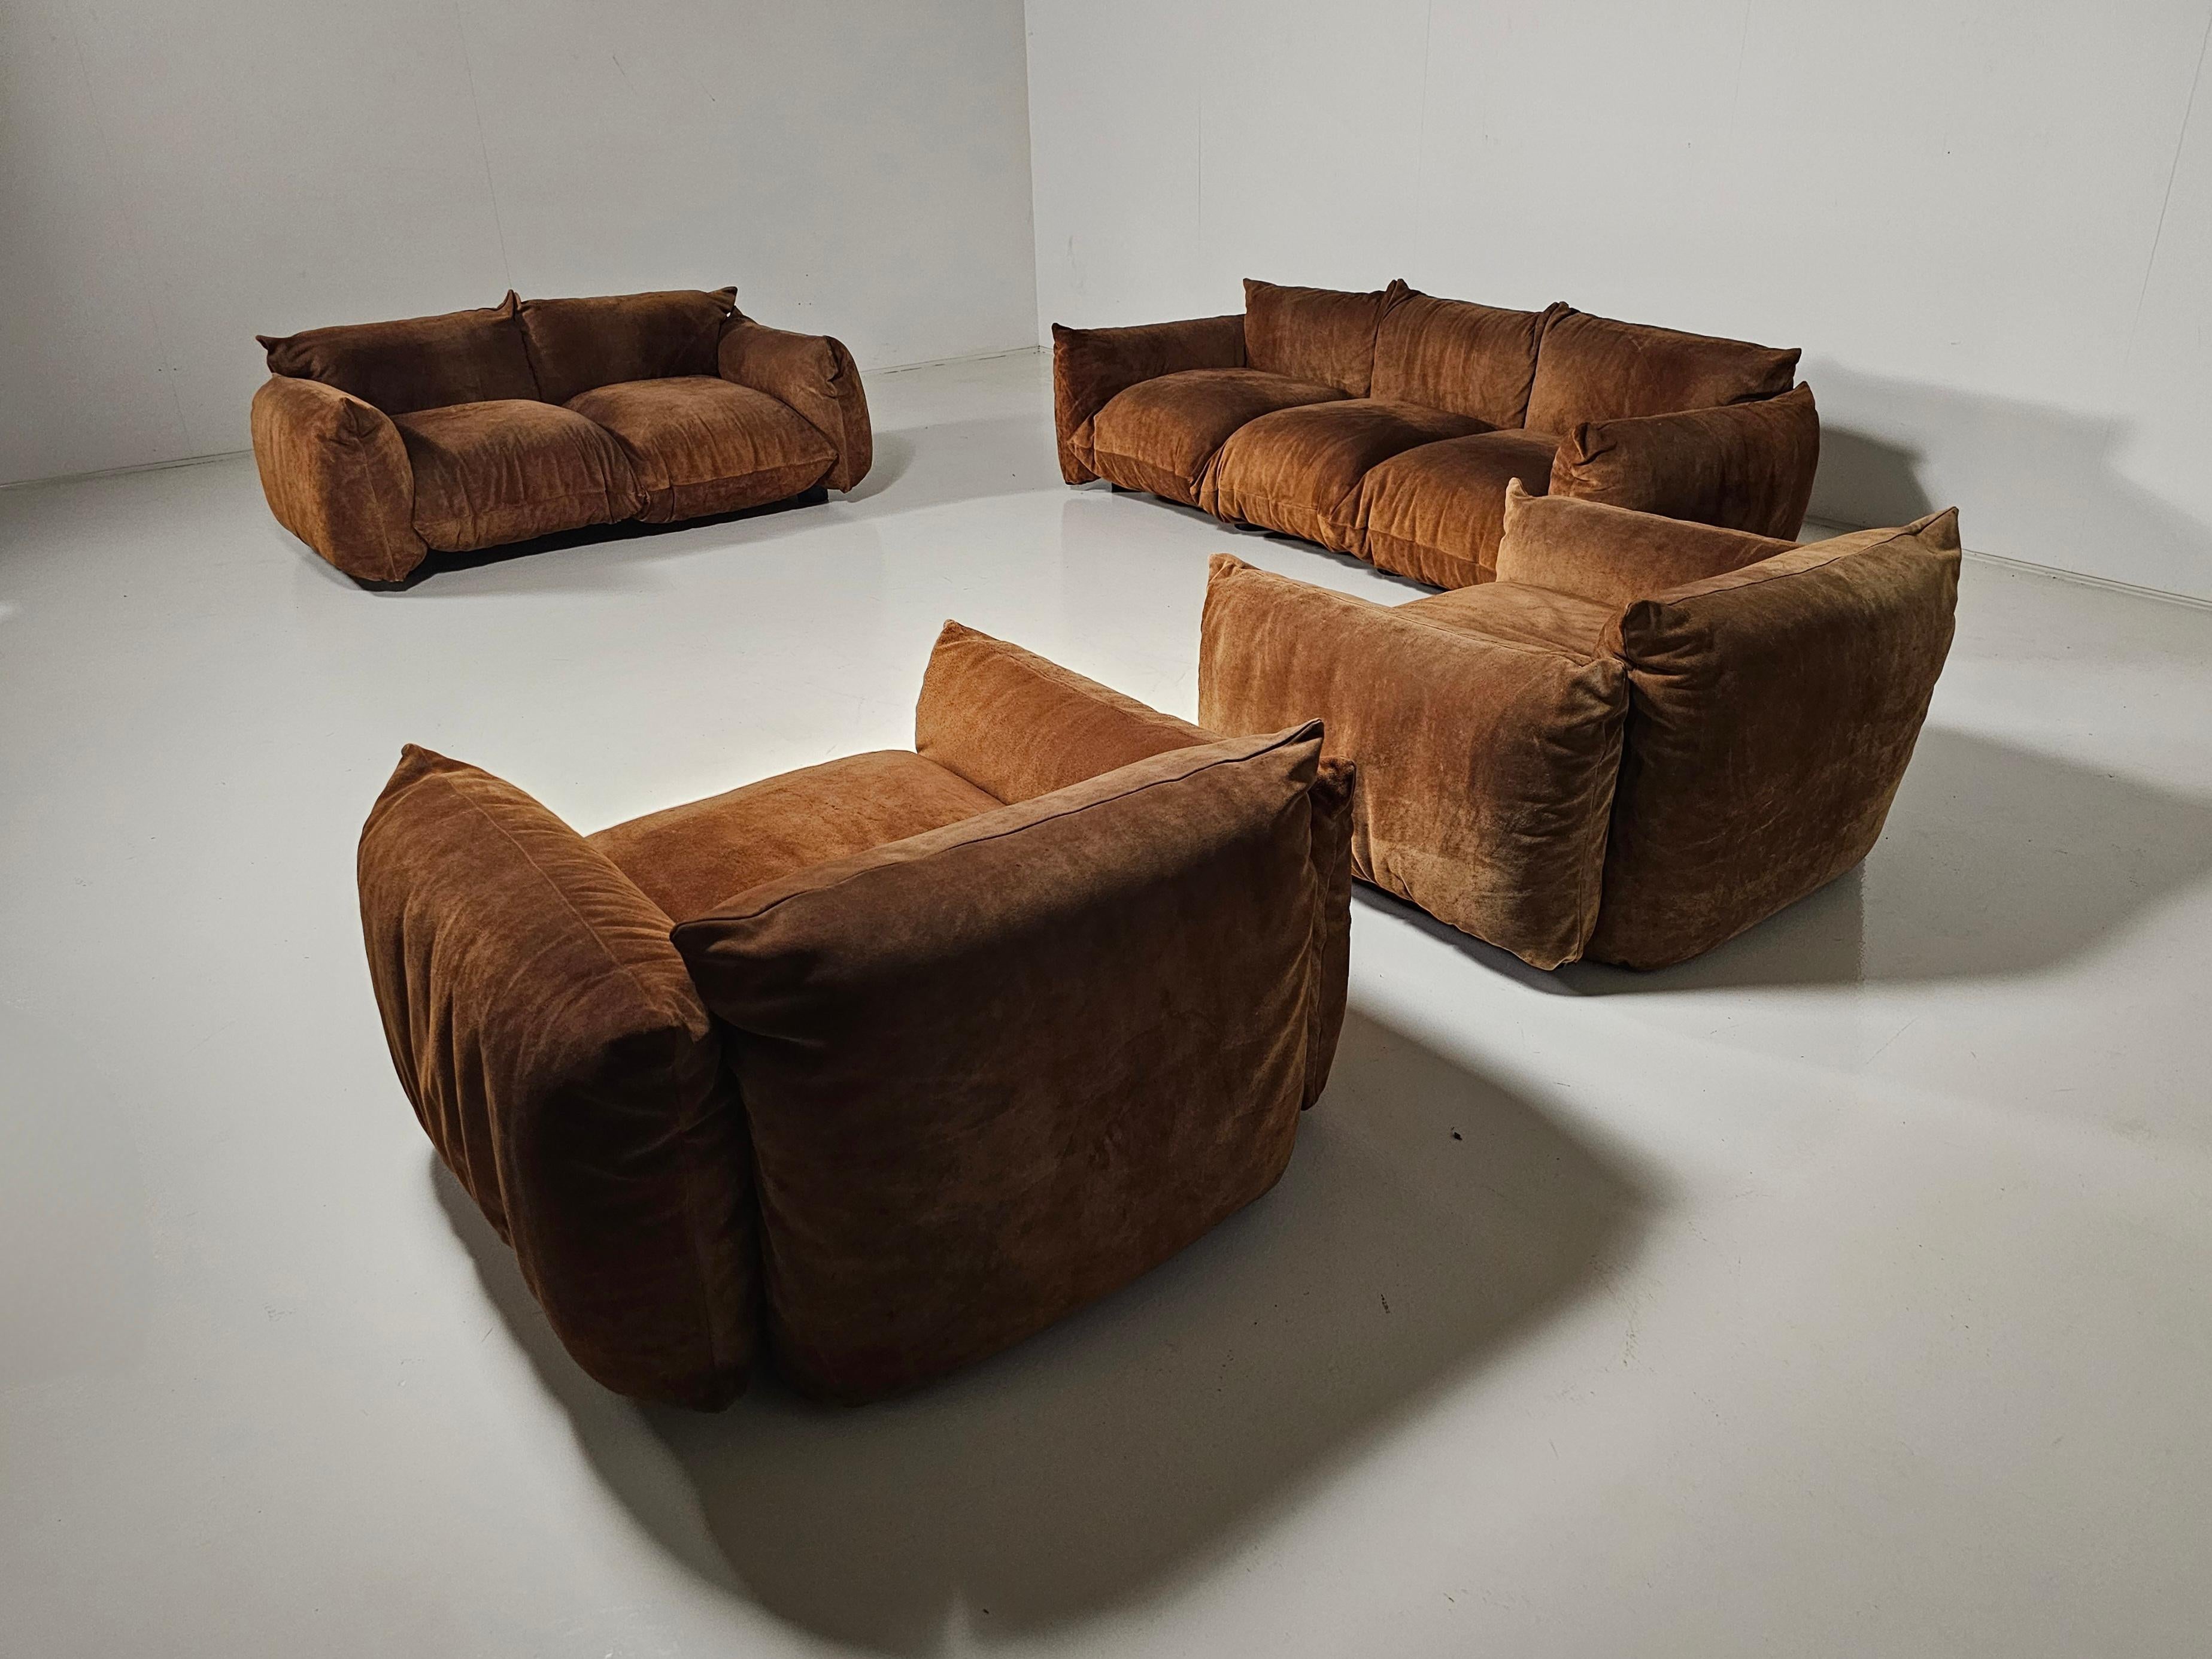 Mario Marenco for Arflex, 'Marenco' set, suede, Italy, 1970

Early edition Marenco set designed by Mario Marenco for Arflex. The set features a system that makes the armrest and seats the base portion. There is a metal tubular frame facilitated for